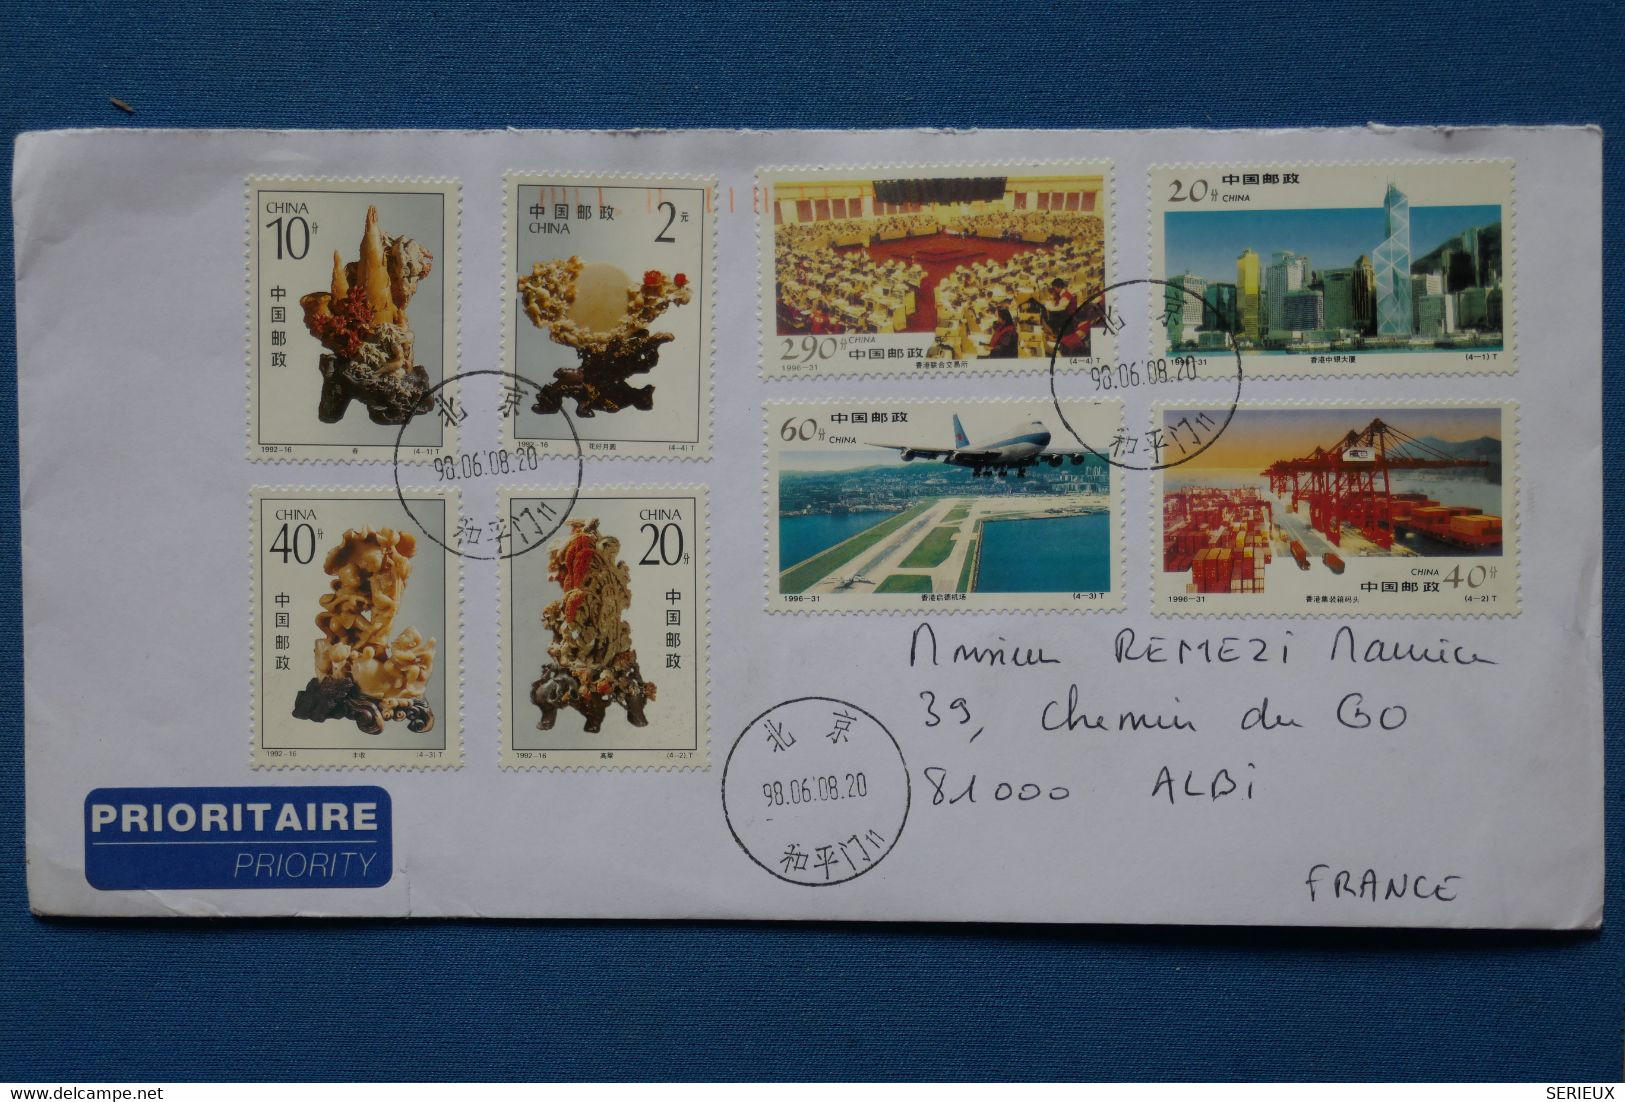 W9 CHINA  BELLE   LETTRE  1996 CHINE   POUR  ALBI  FRANCE + AFFRANCH. INTERESSANT - Covers & Documents